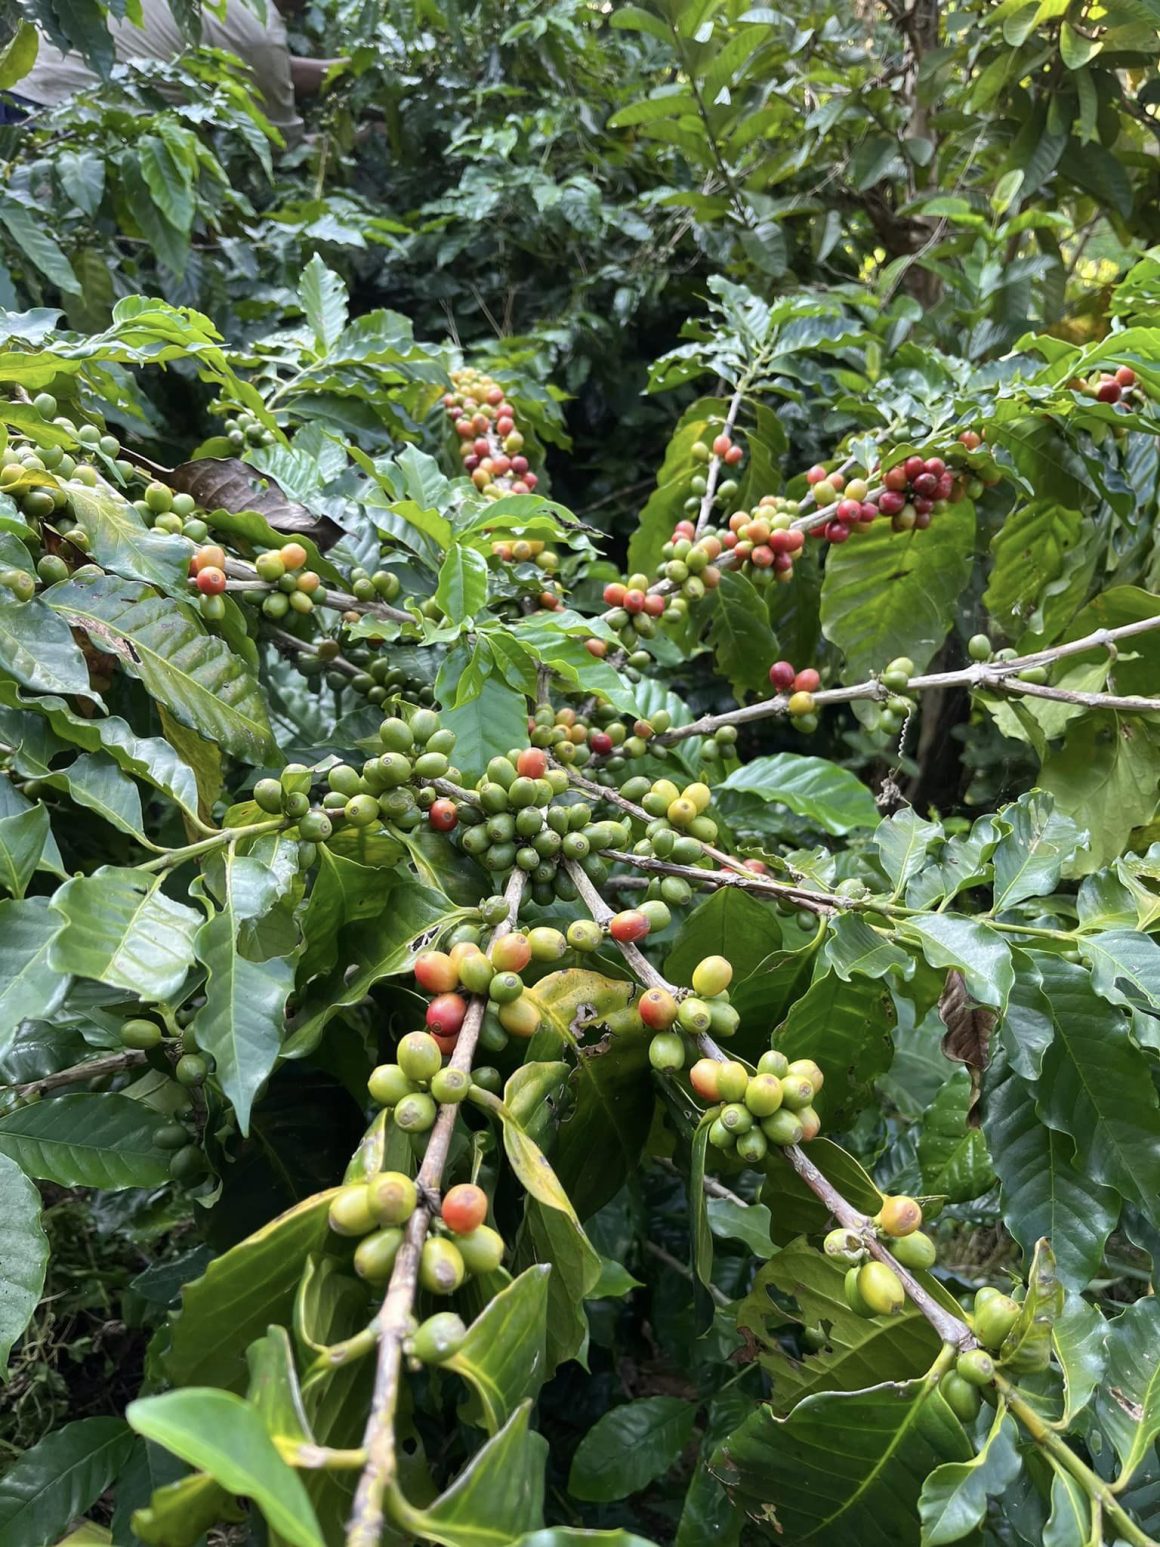 When is coffee harvested